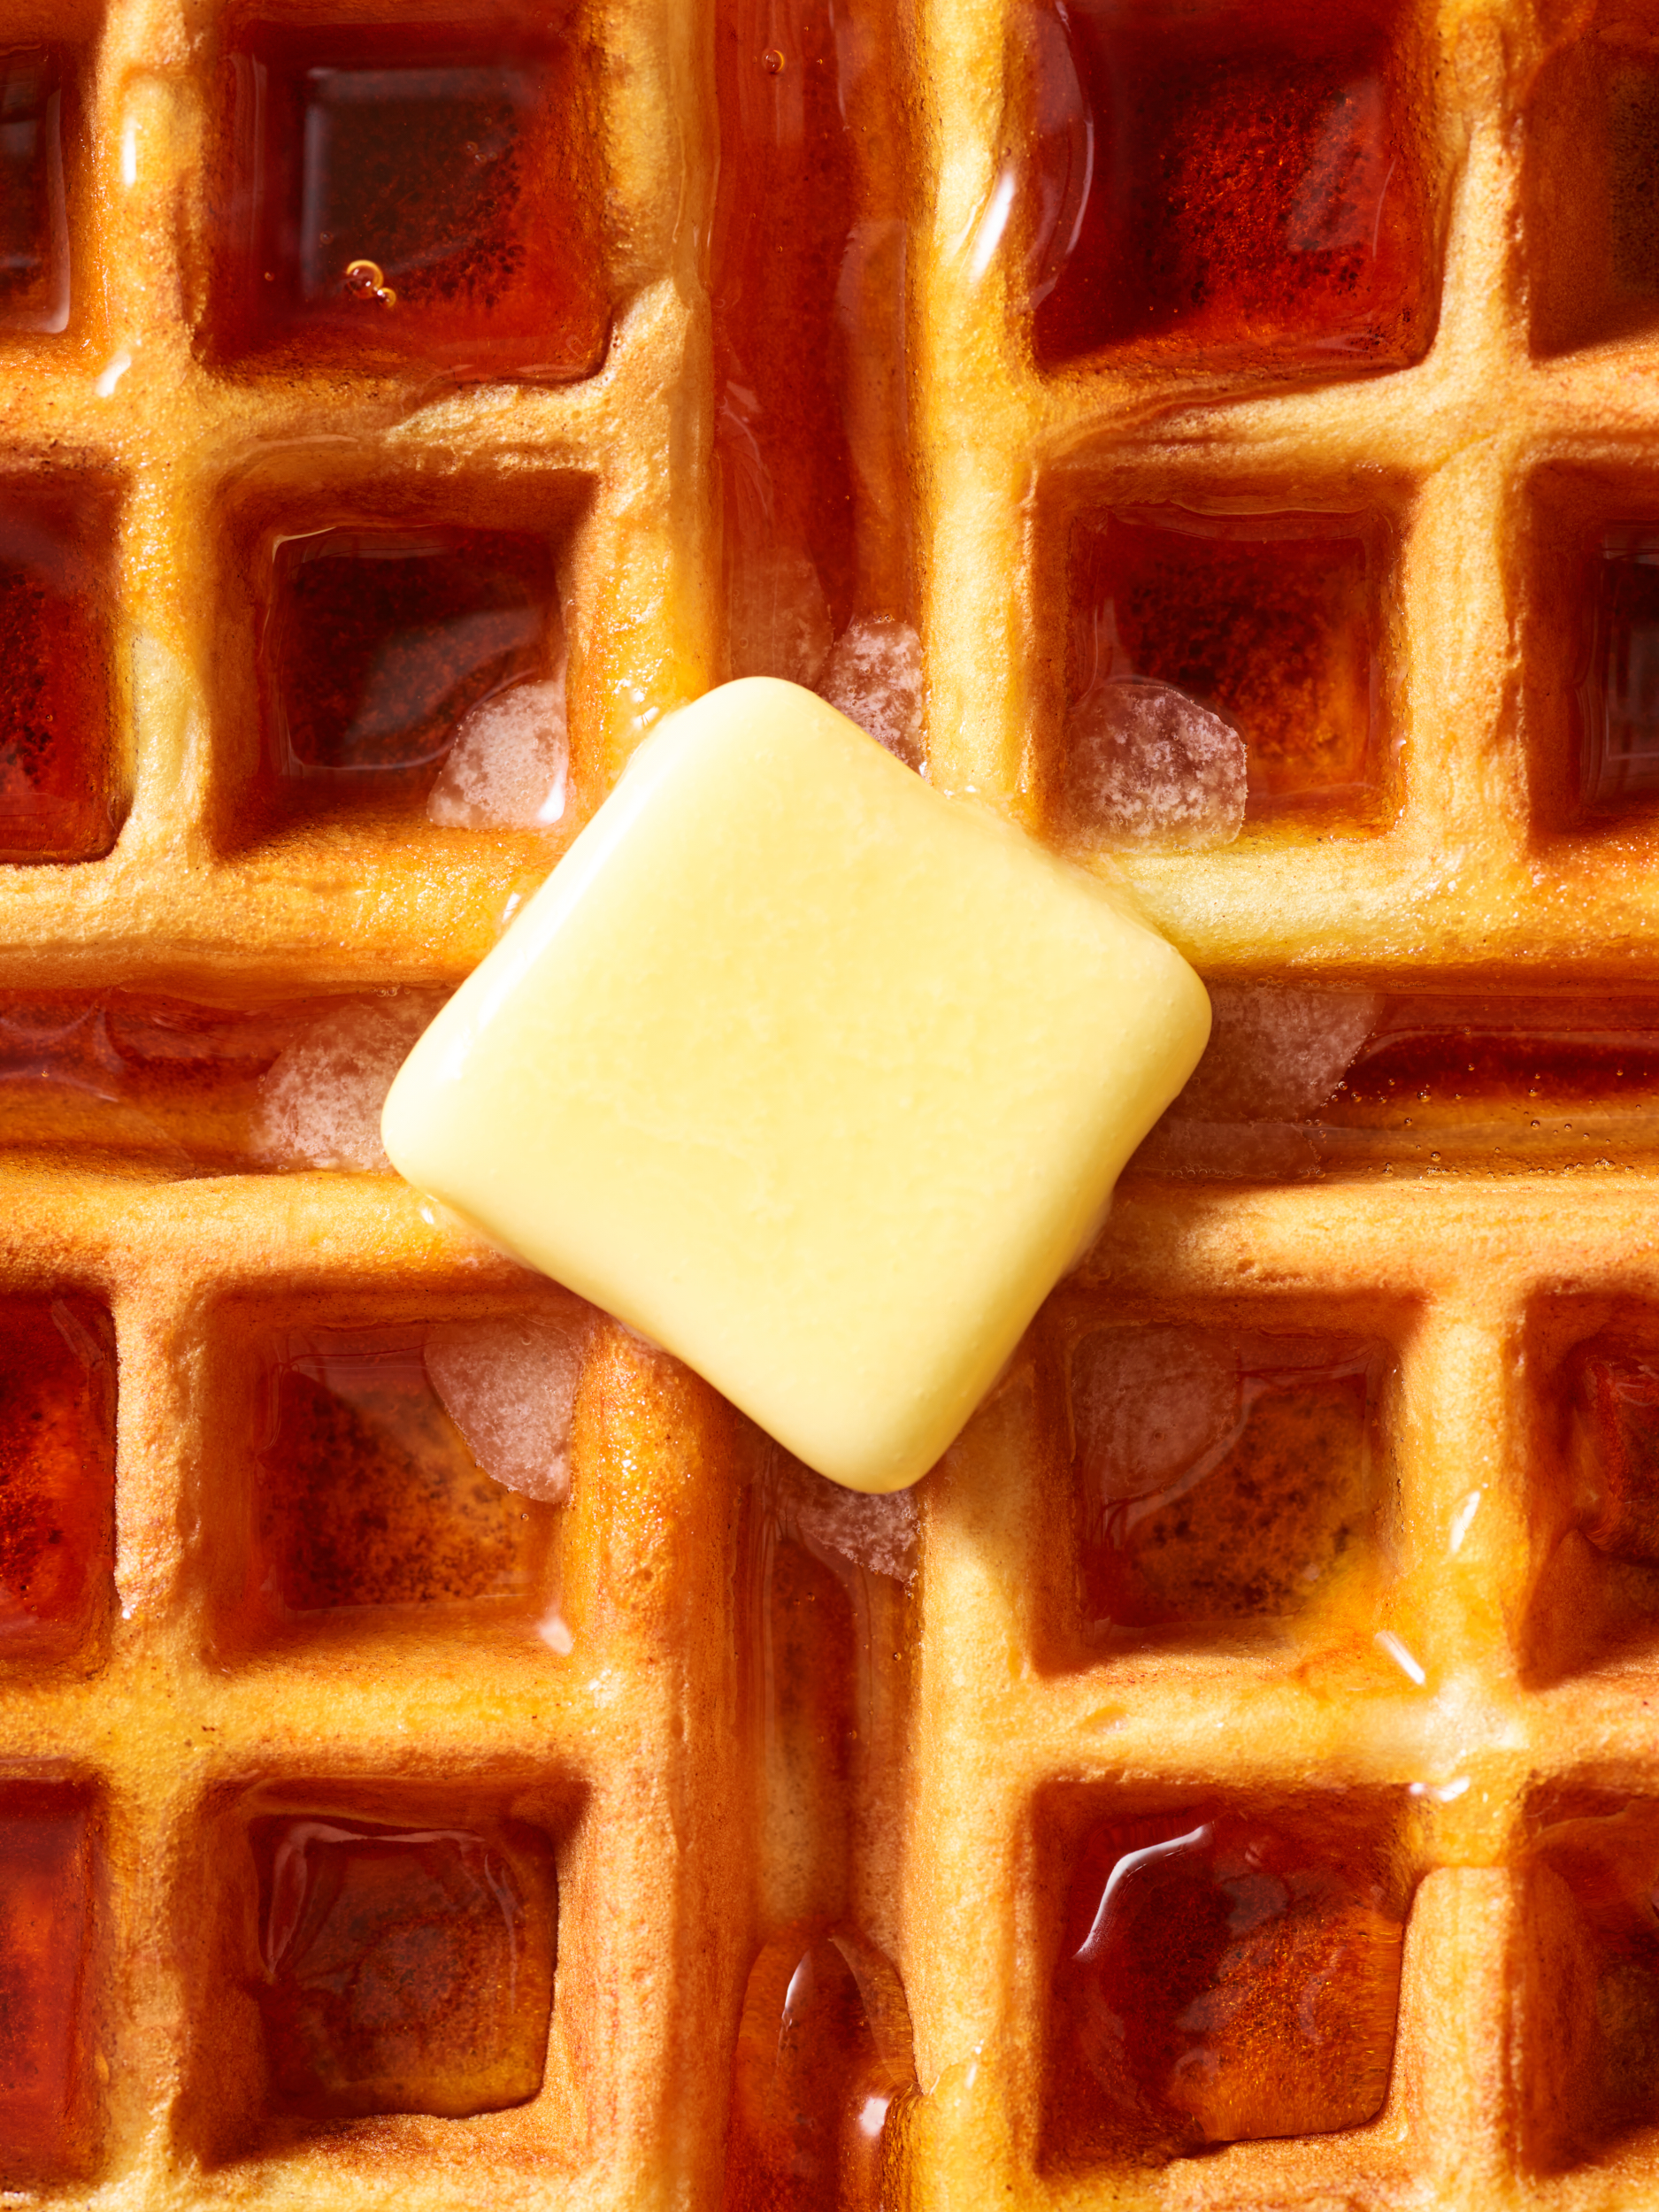 Graphic modern breakfast image of melting butter on a waffle image by Los Angeles commercial food and product photographer Vinnie Finn | SternRep